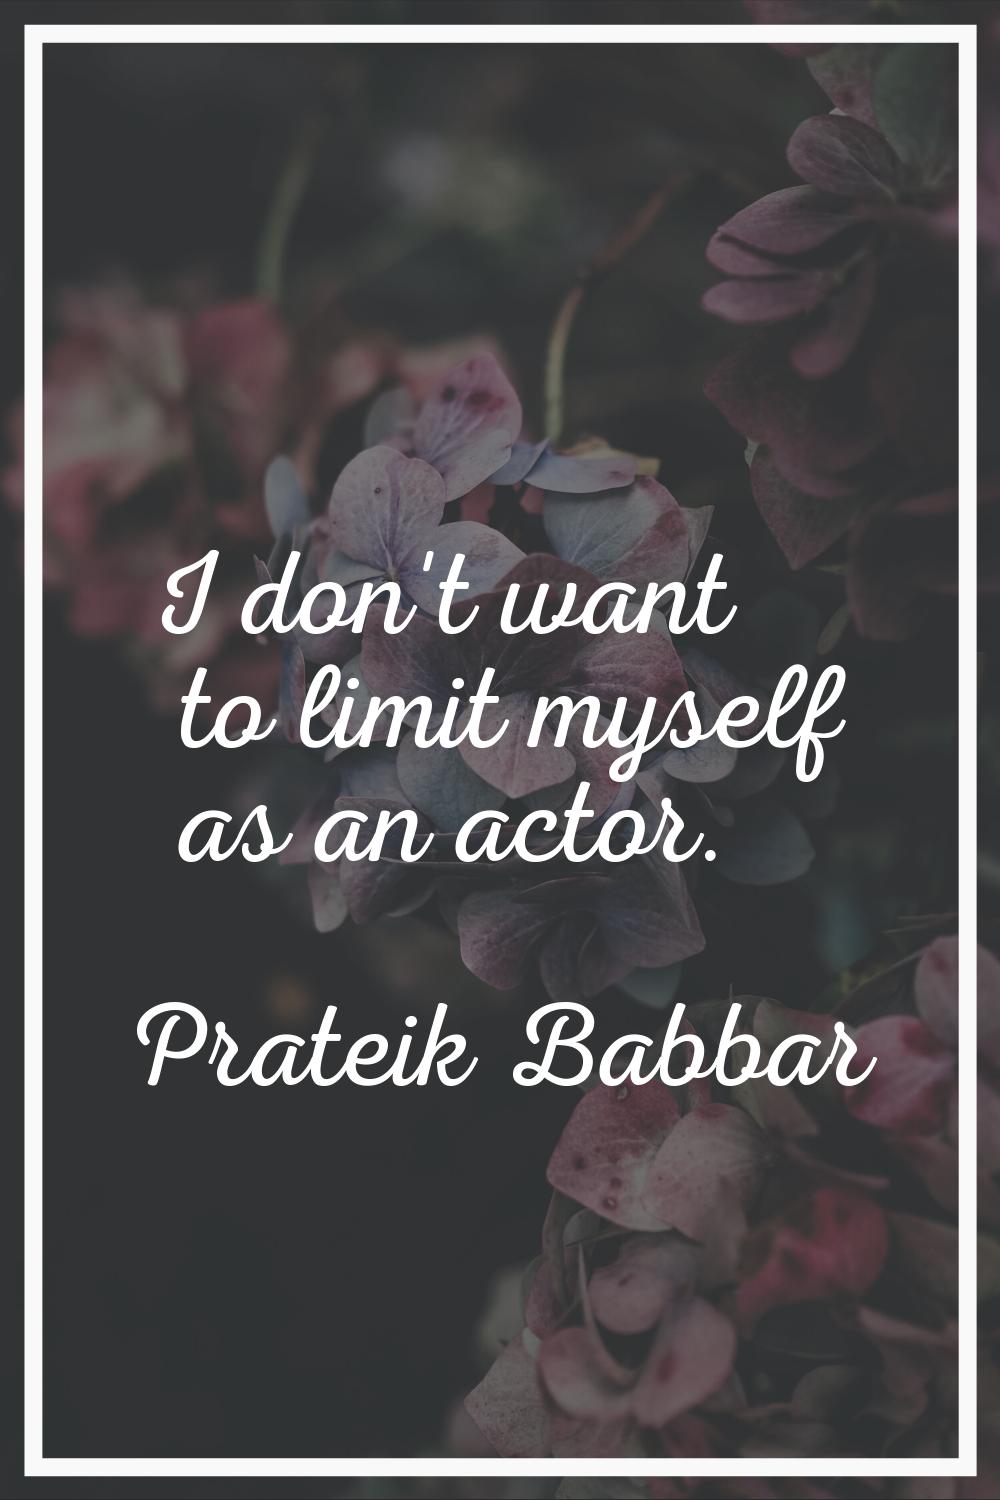 I don't want to limit myself as an actor.